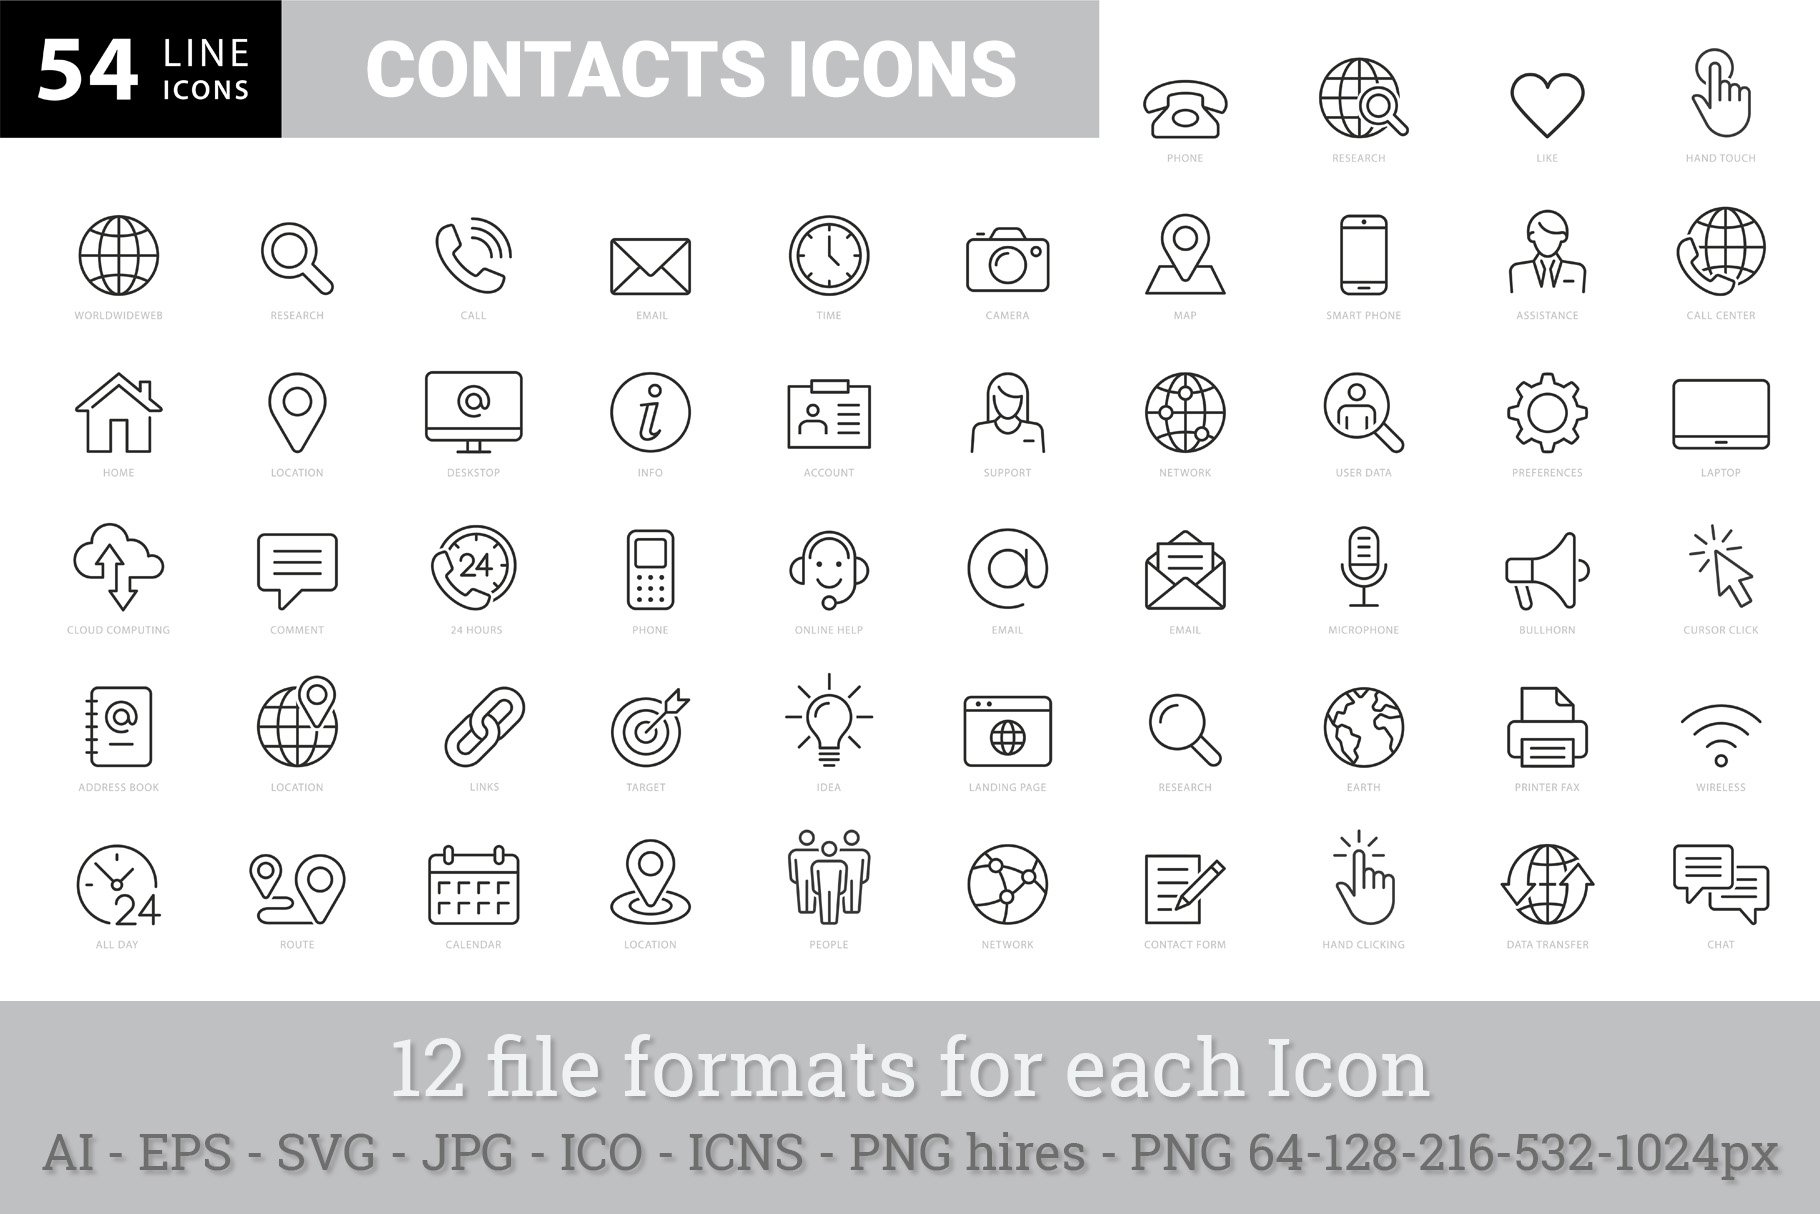 Web and Contacts Line Icon Set cover image.